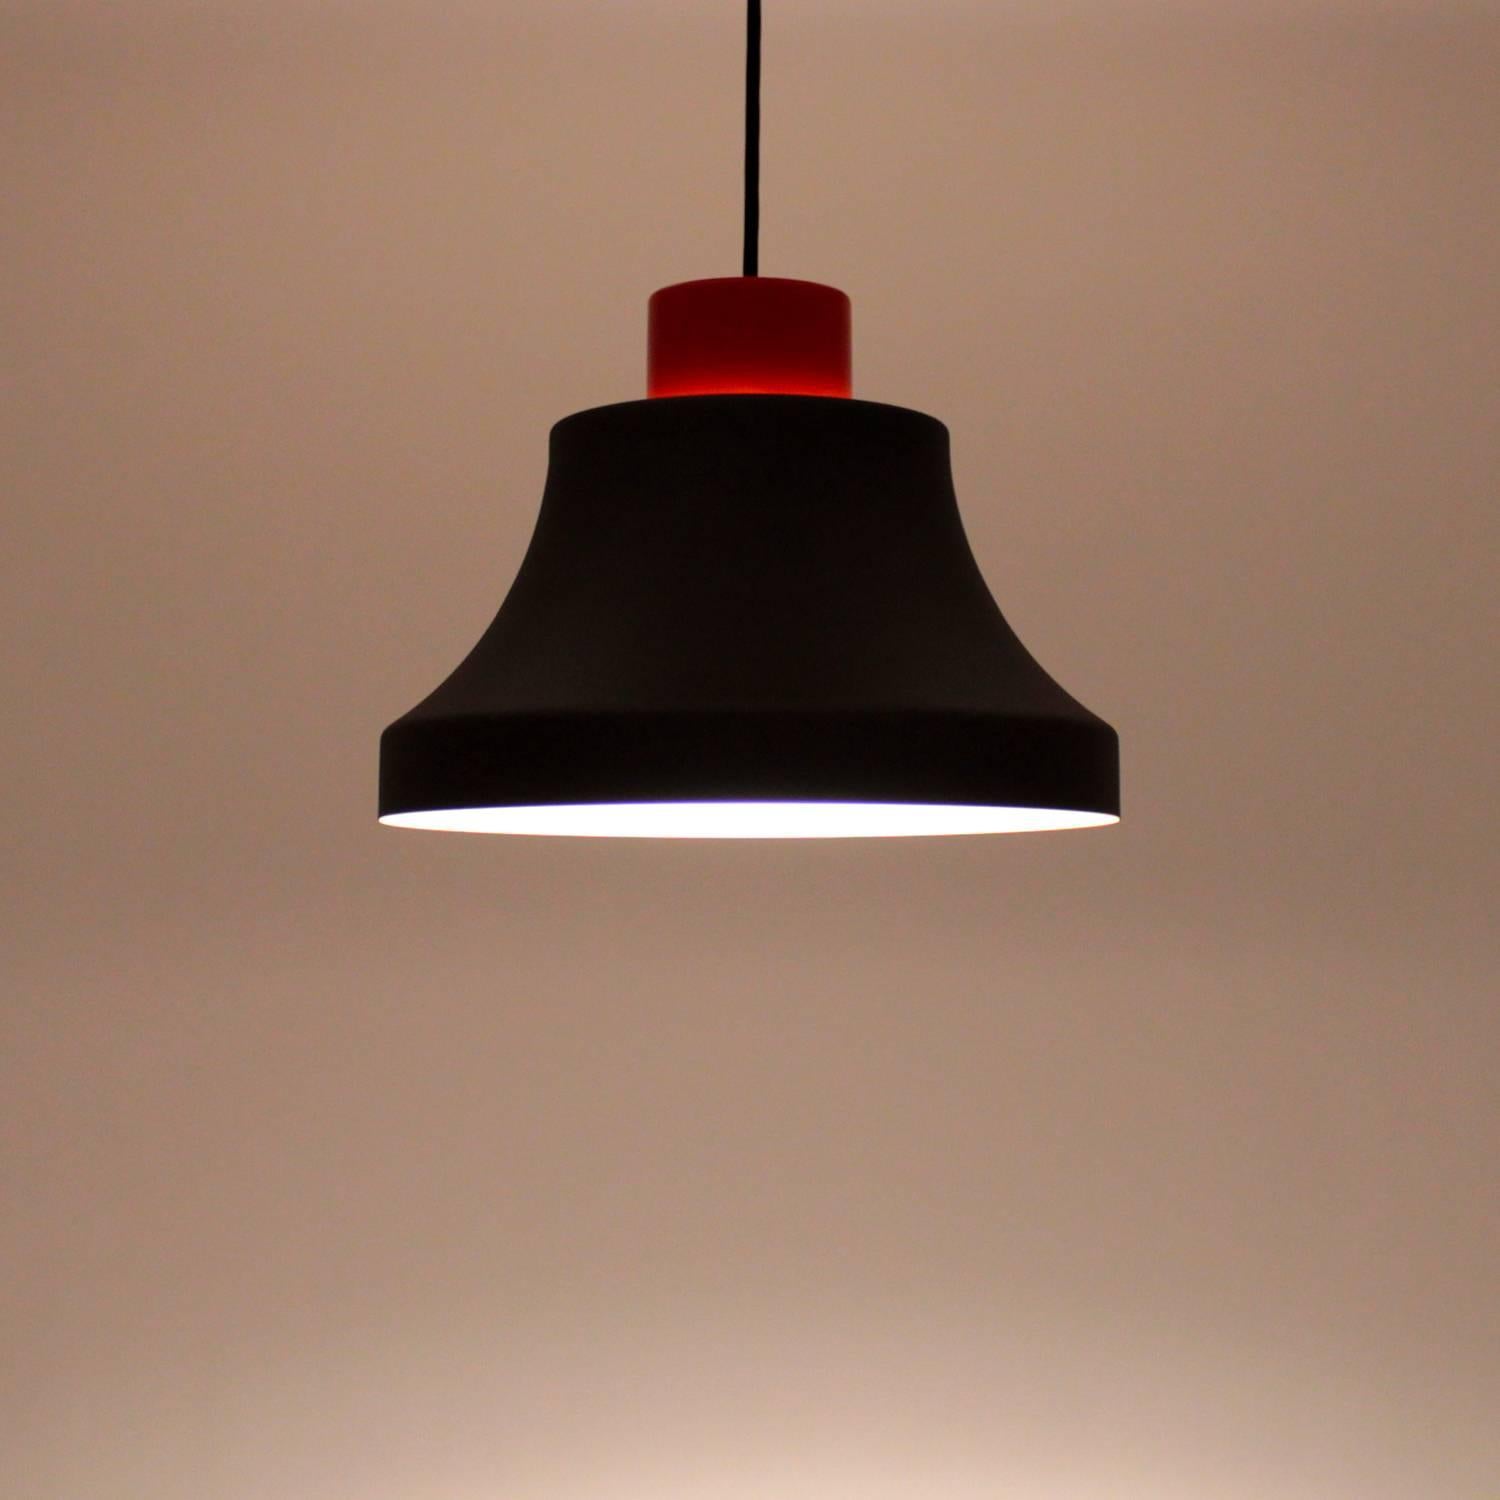 Askepot (means Cinderella in Danish) is designed by Jo Hammerborg for Fog & Mørup in 1976-1977 - beautiful Industrial-style hanging lamp, unusual Hammerborg design.

This bell shaped pendant light is an unusual Hammerborg design without any of his